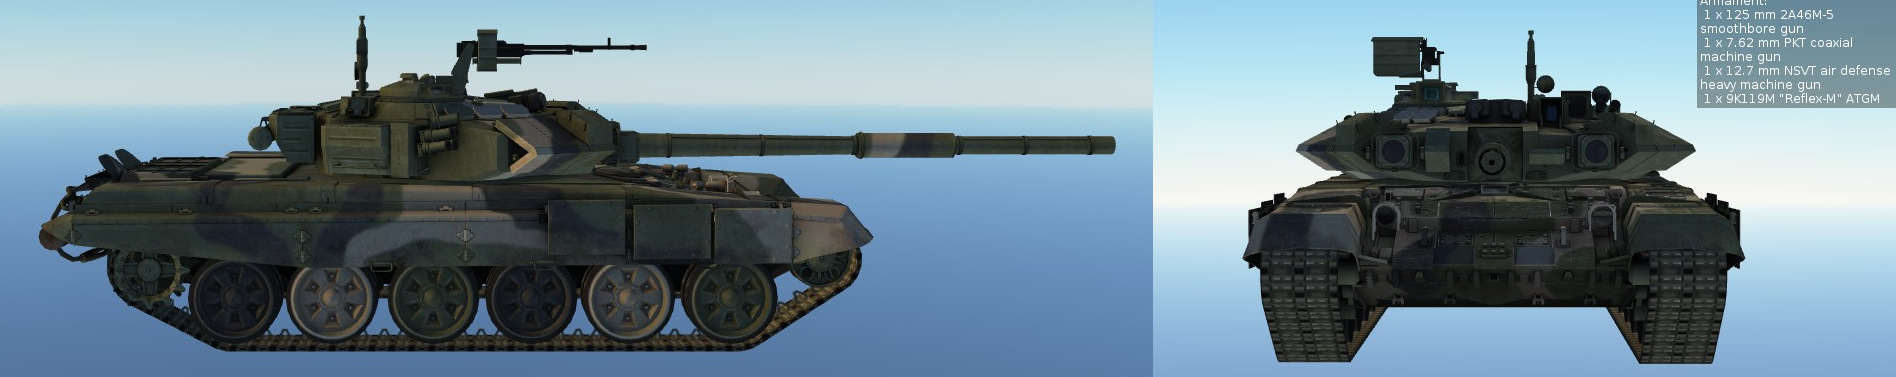 T-90.png